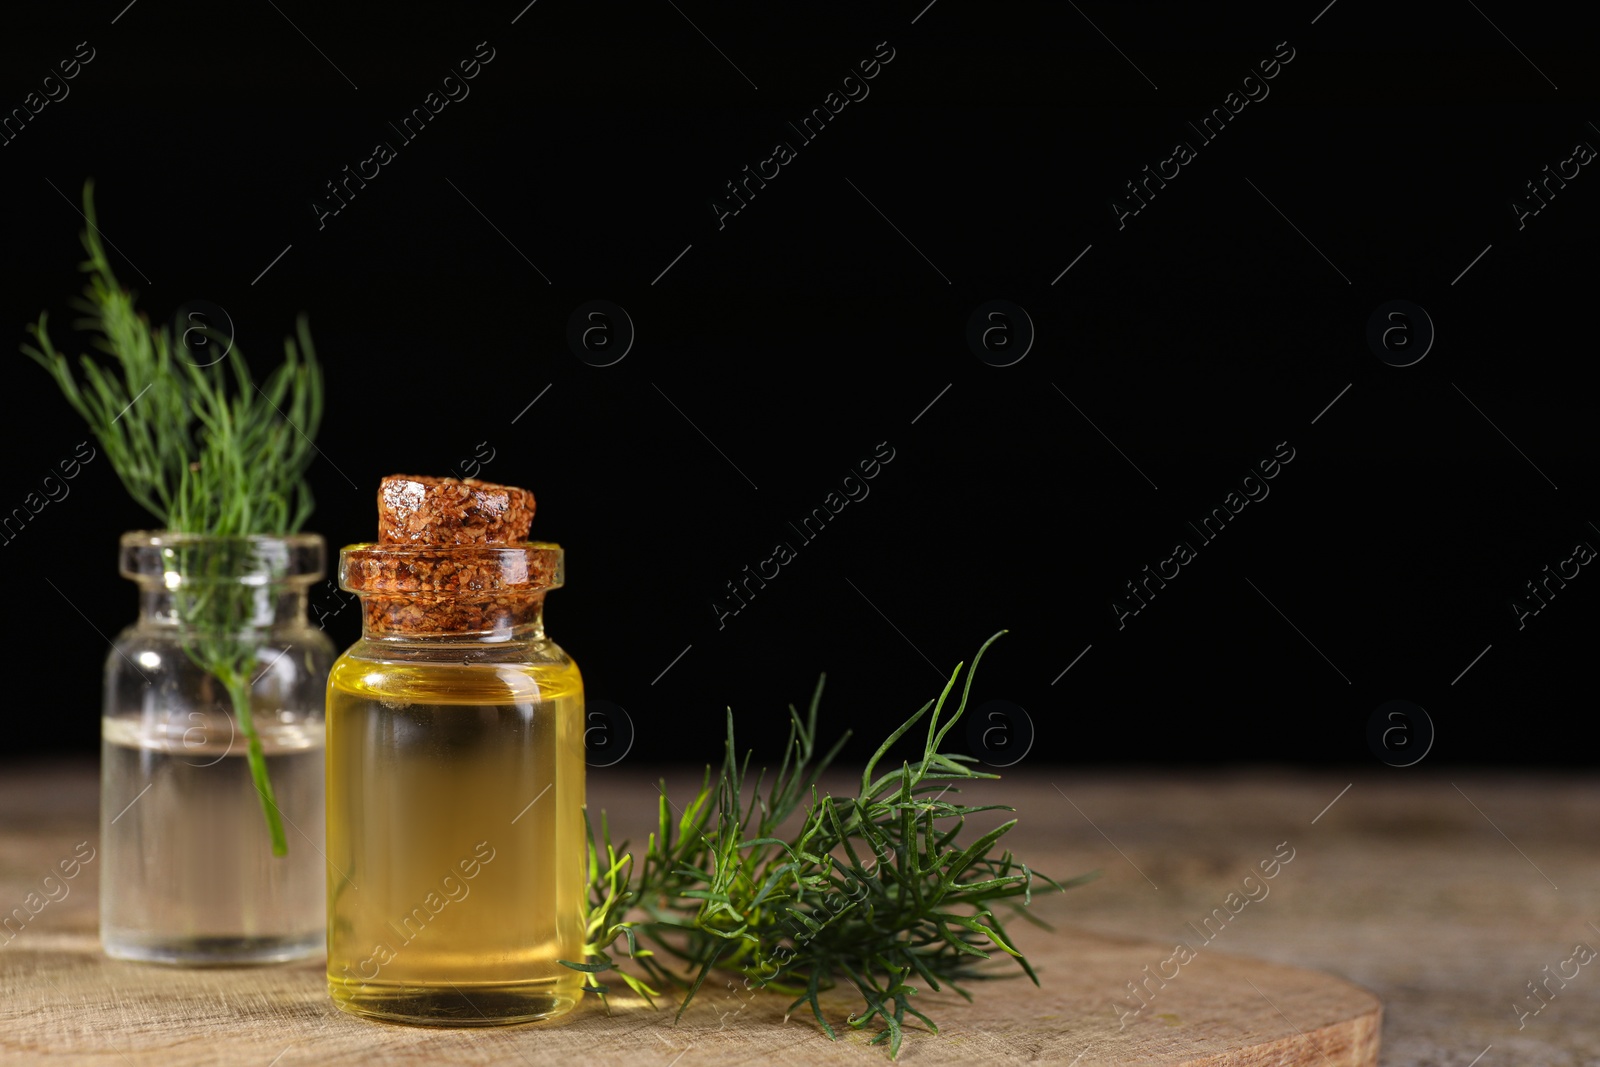 Photo of Bottles of essential oil and fresh dill on wooden table against black background. Space for text